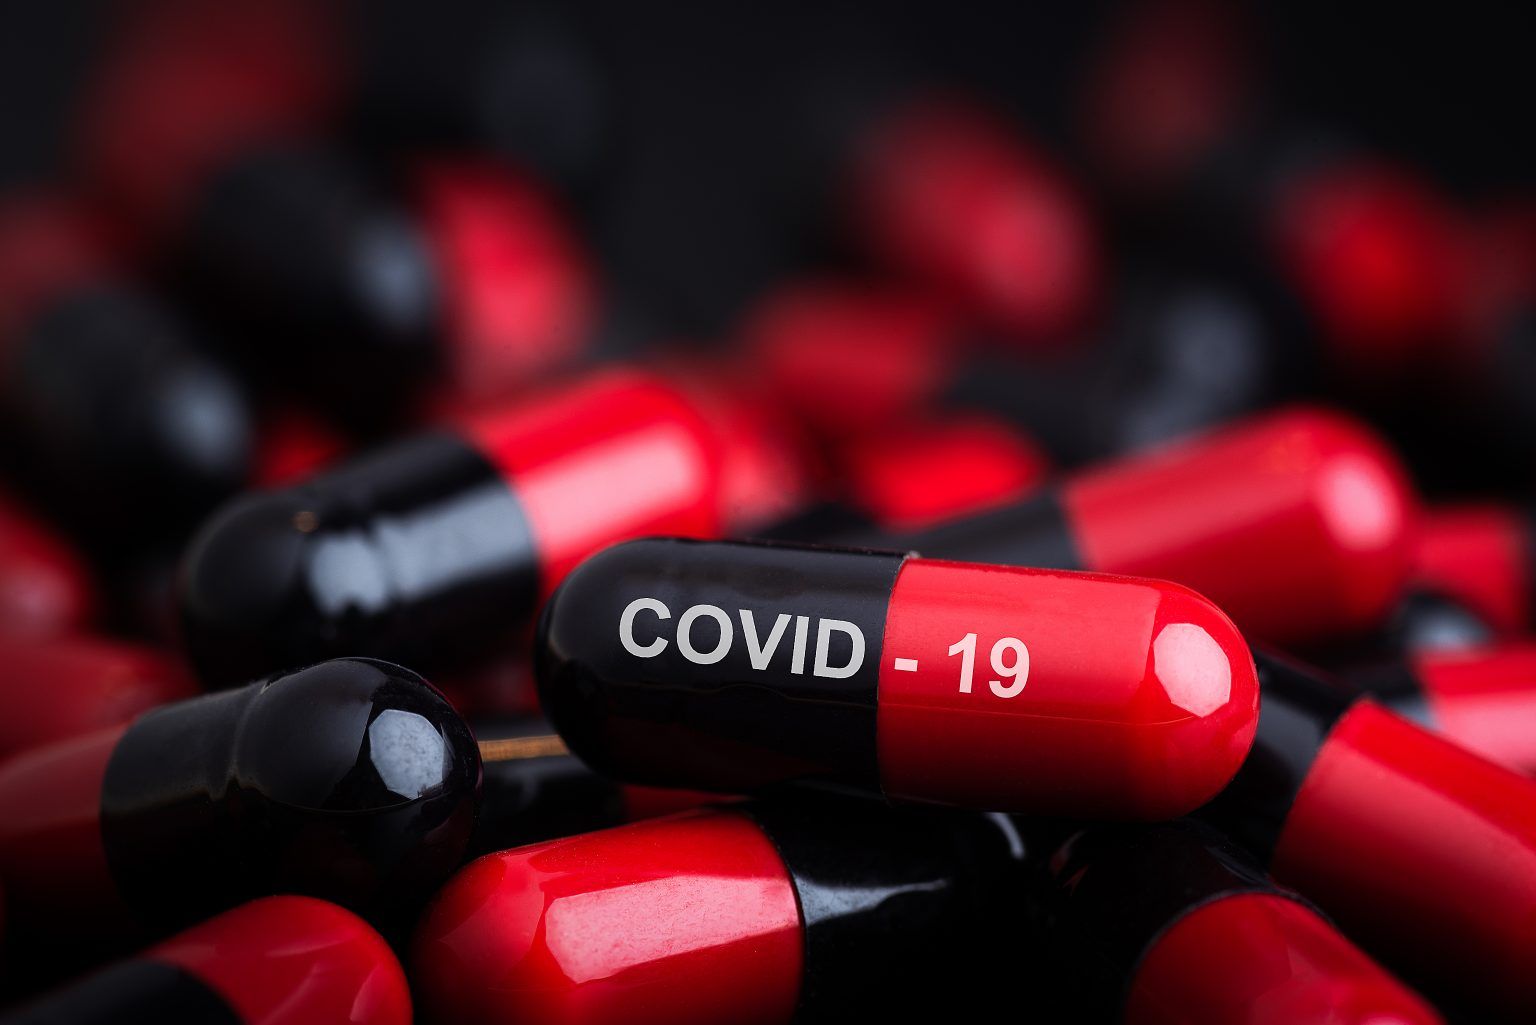 DEVELOPMENT: The new Covid pill has been developed by Pfizer and Merck and in tests reduced the risk of hospitalisation by 89 per cent